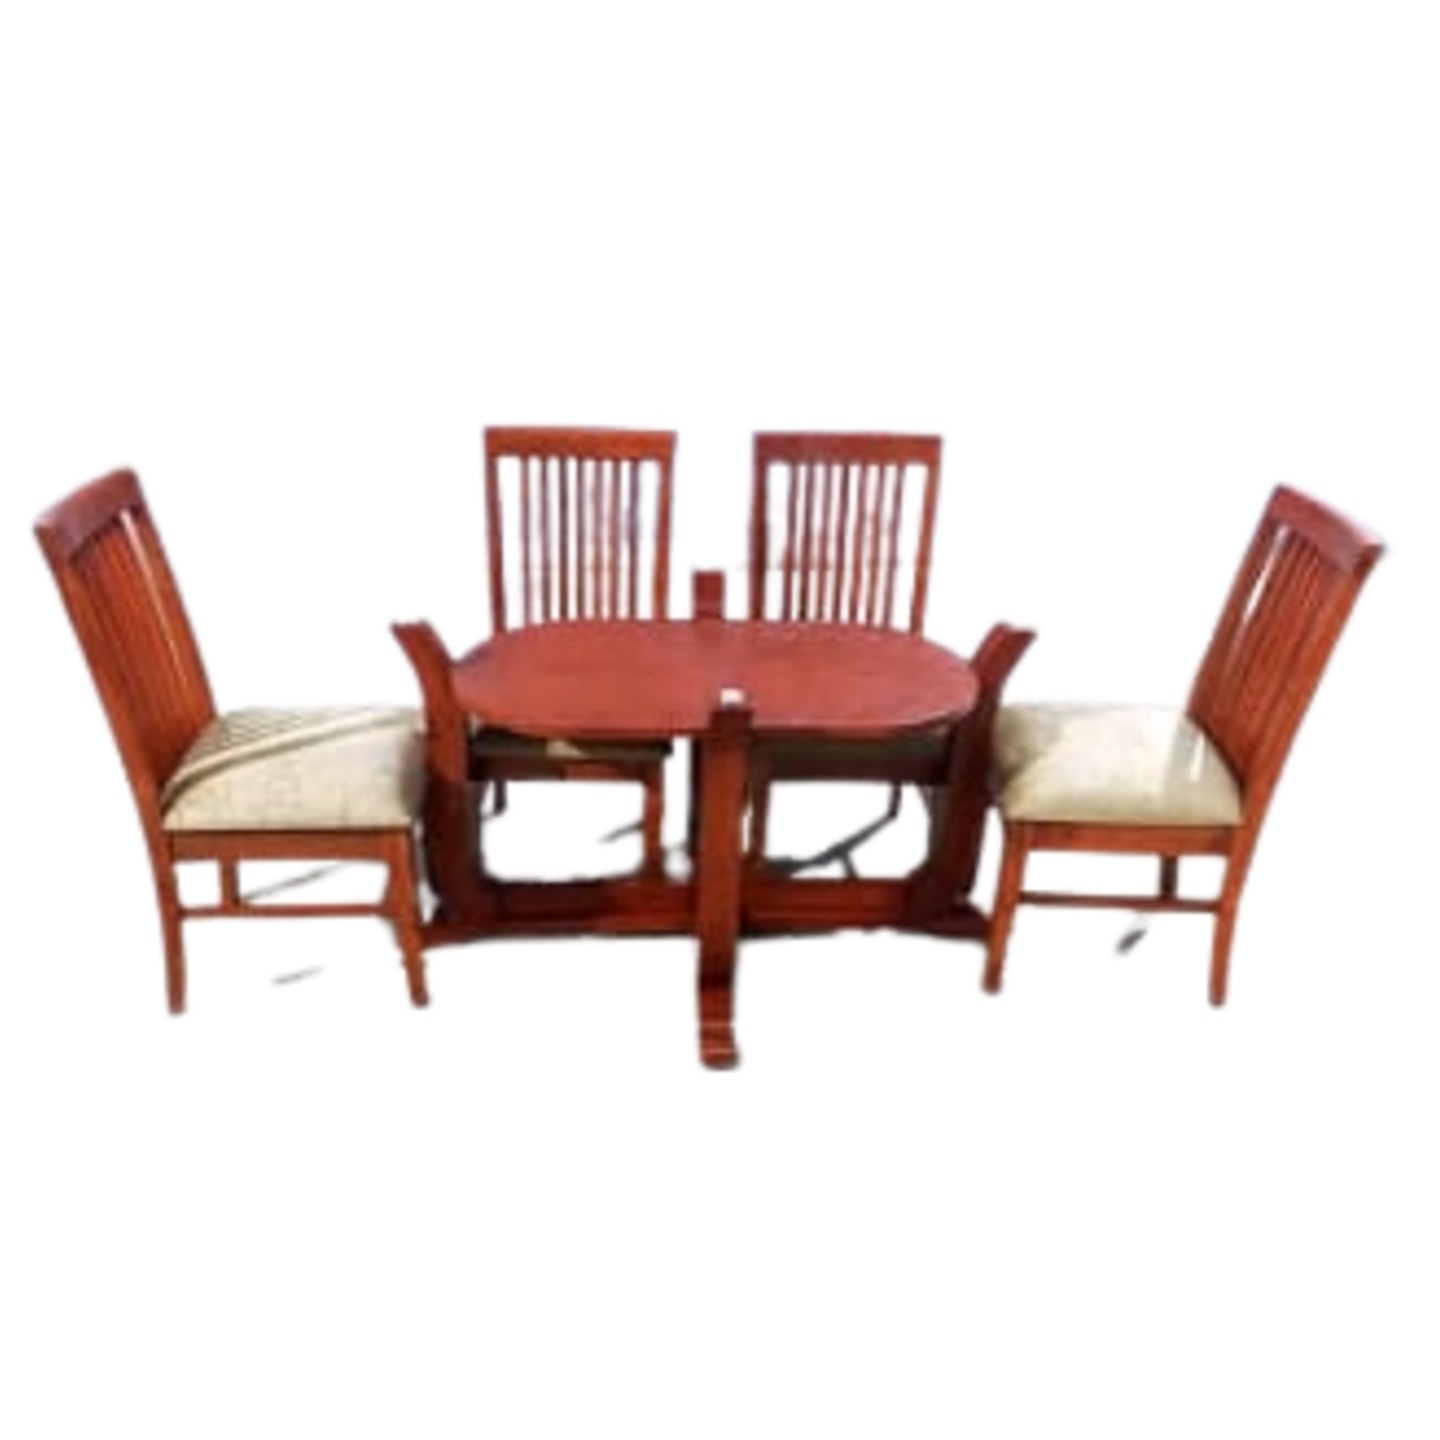 DW Glass Top L-004 Four Seater Dining Table Set in Brown Colour